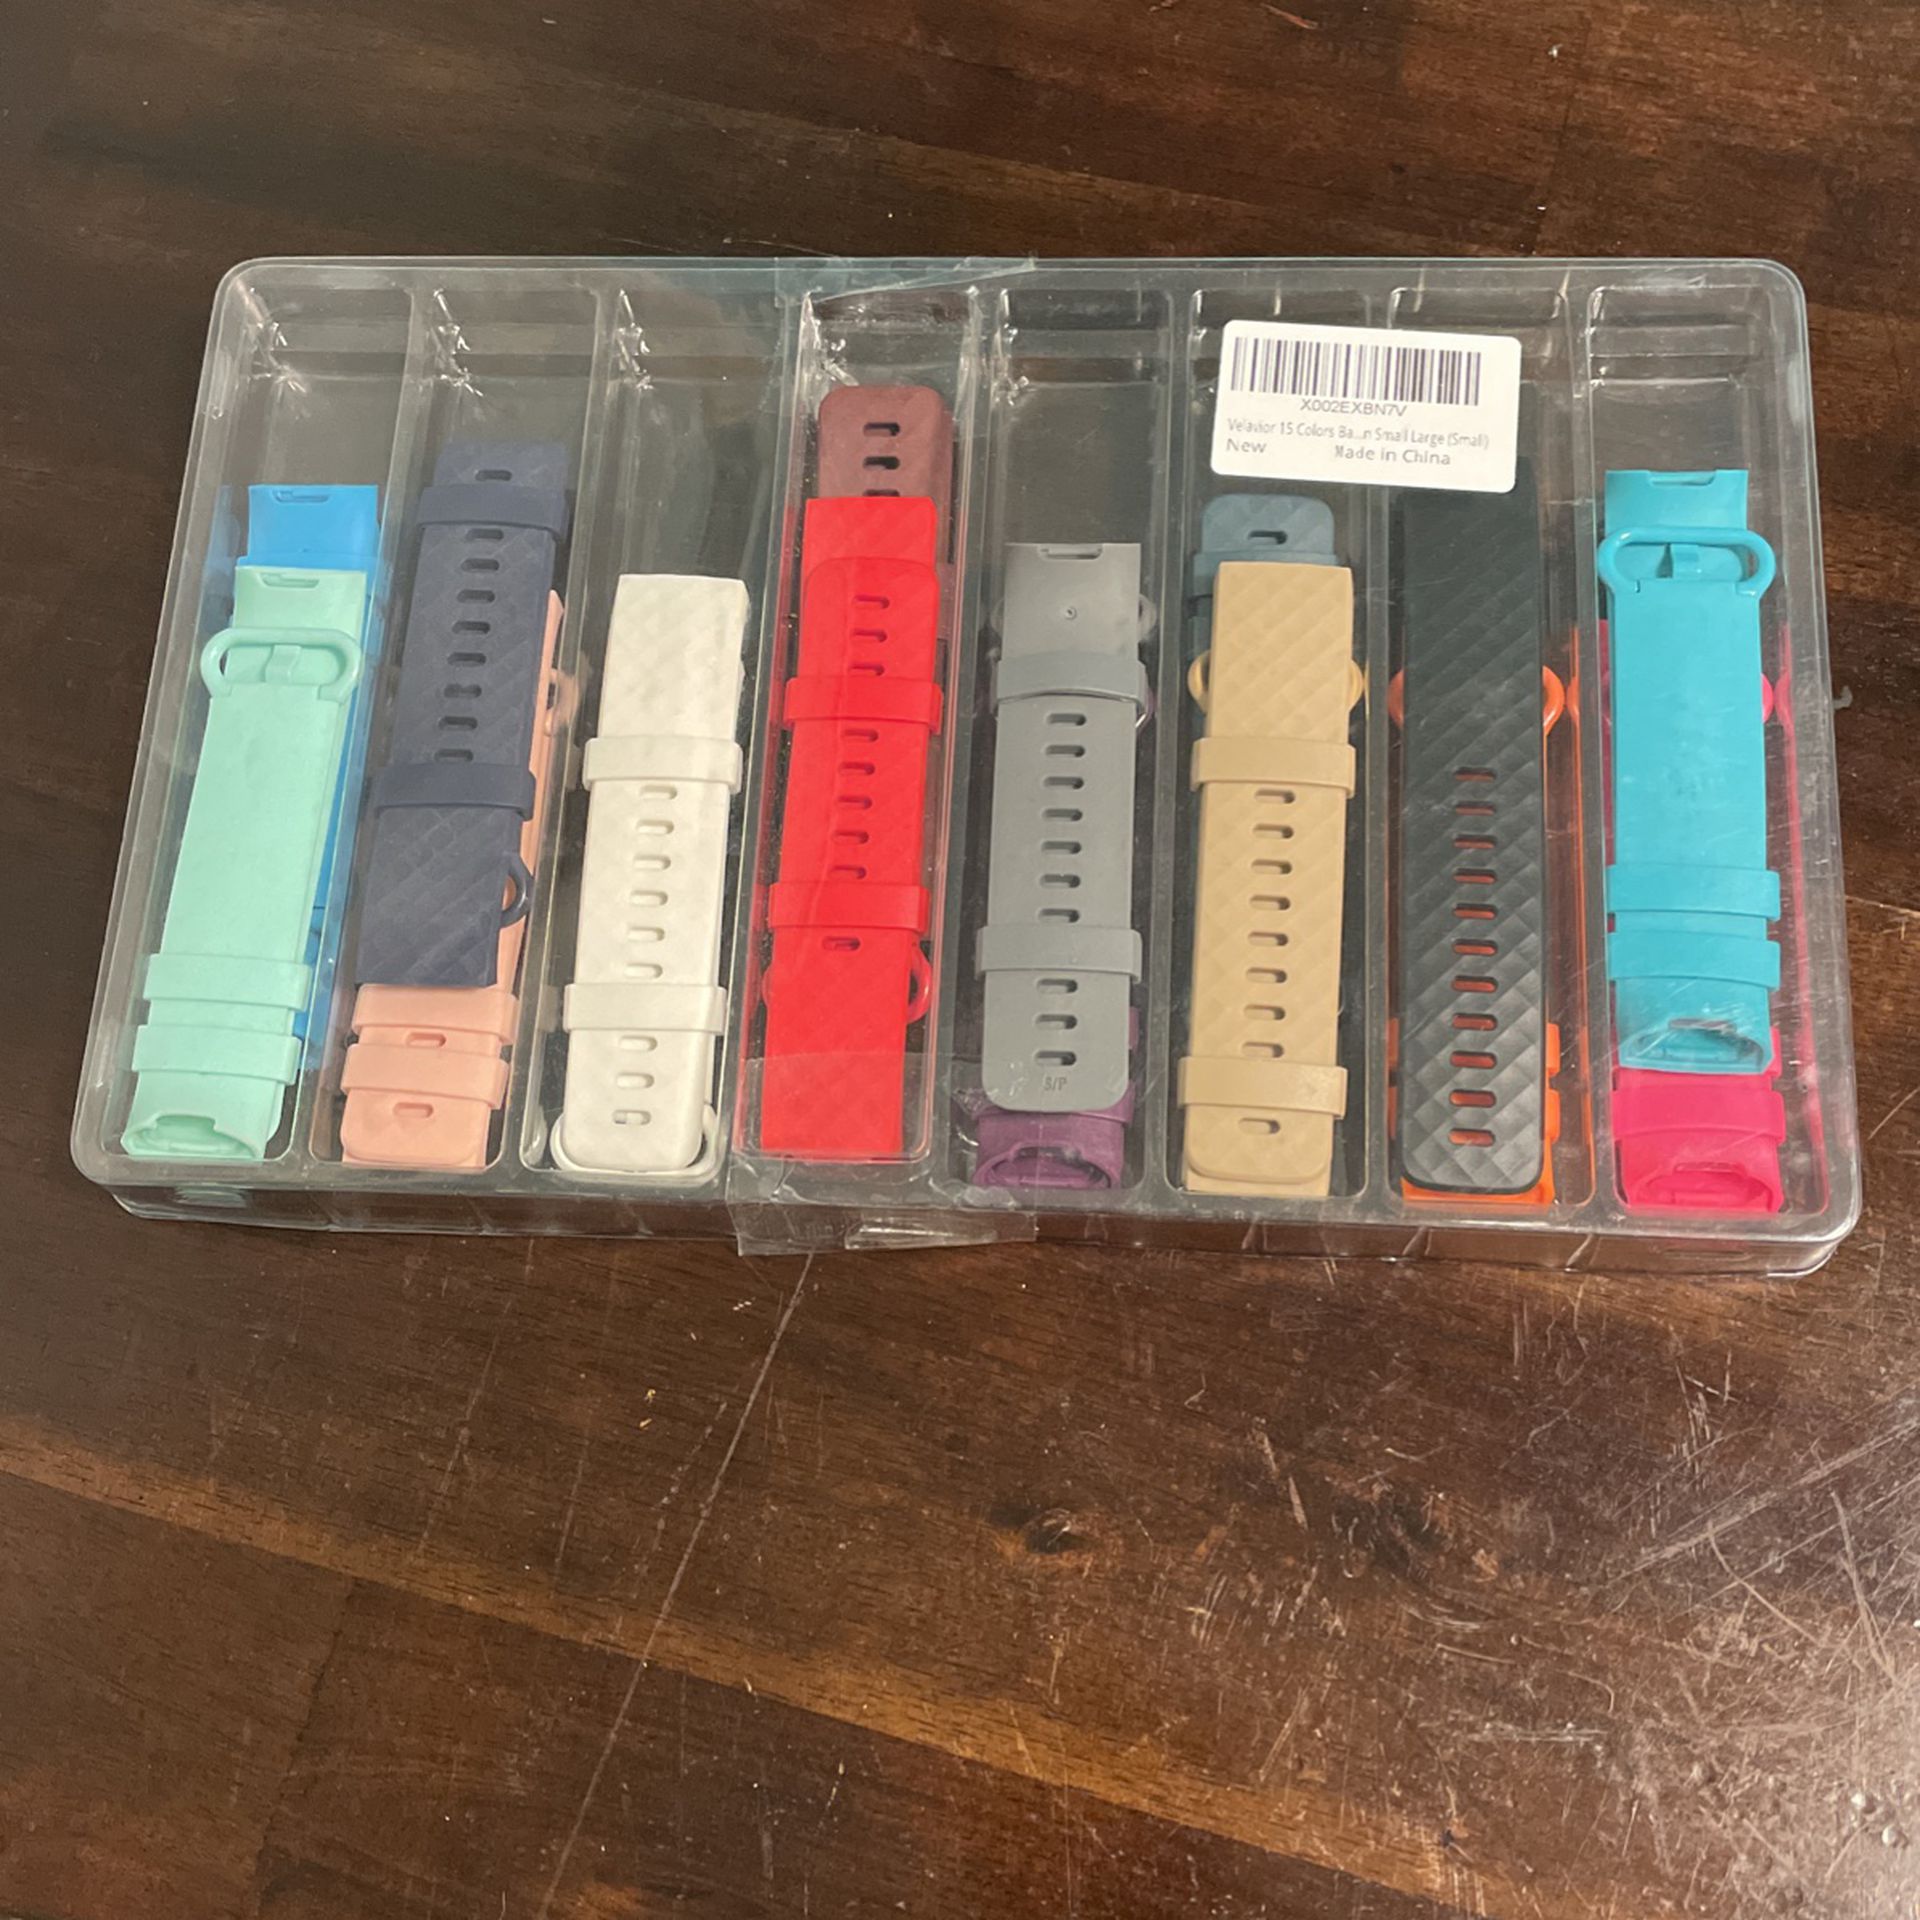 Fitbit Bands 